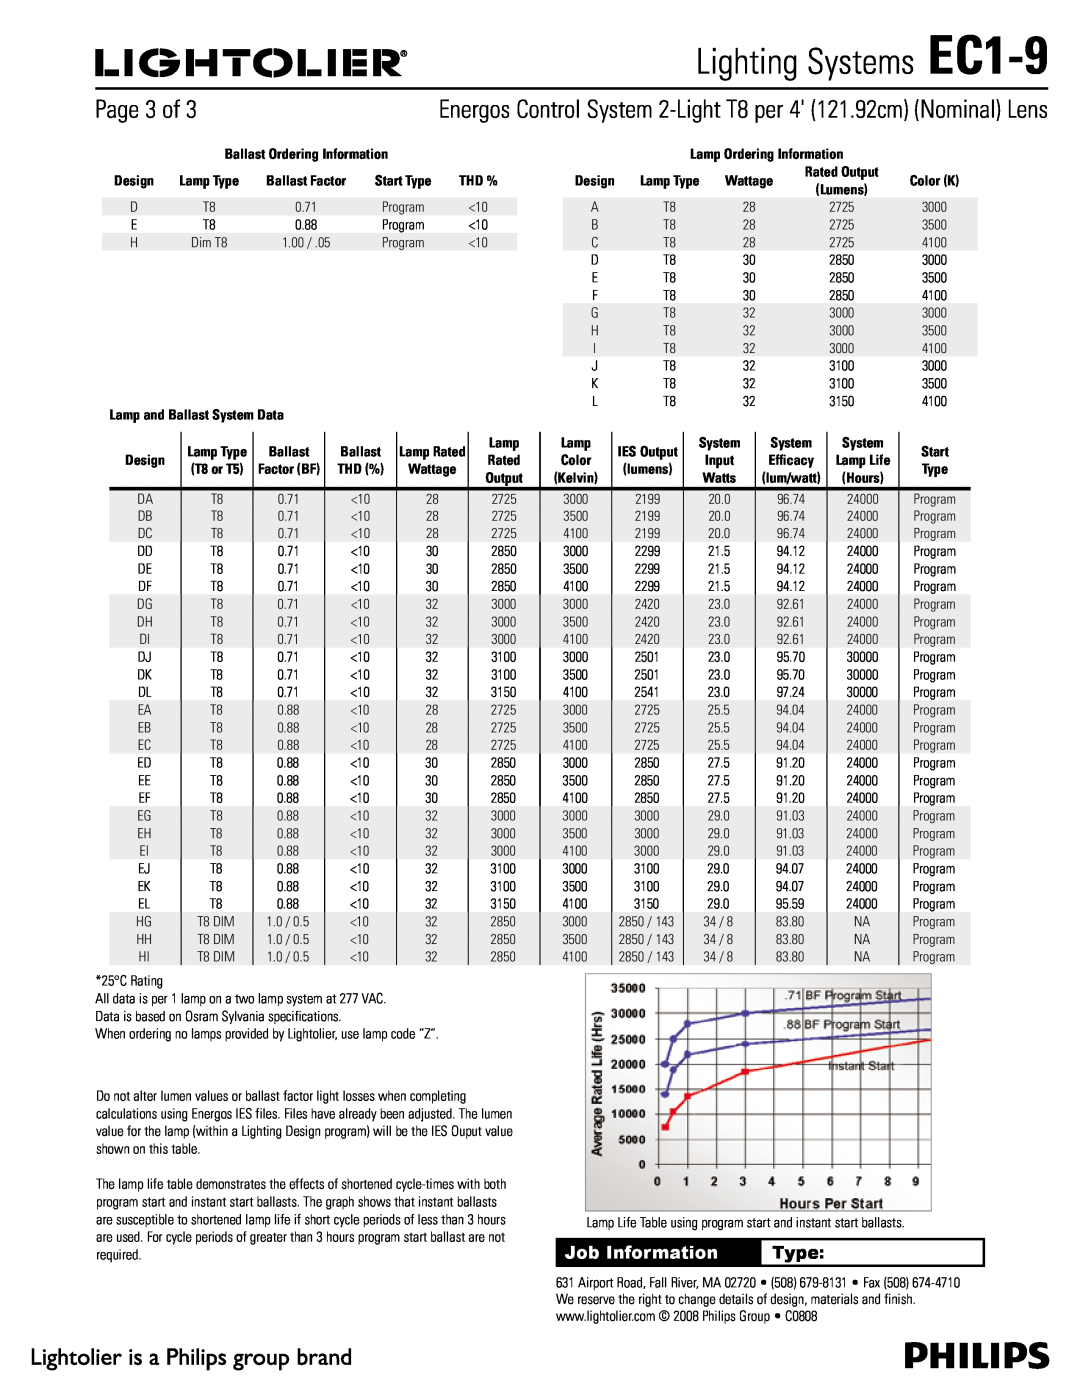 Lightolier specifications Page 3 of, Lighting Systems EC1-9, Job Information, Type, Lamp Ordering Information, Wattage 